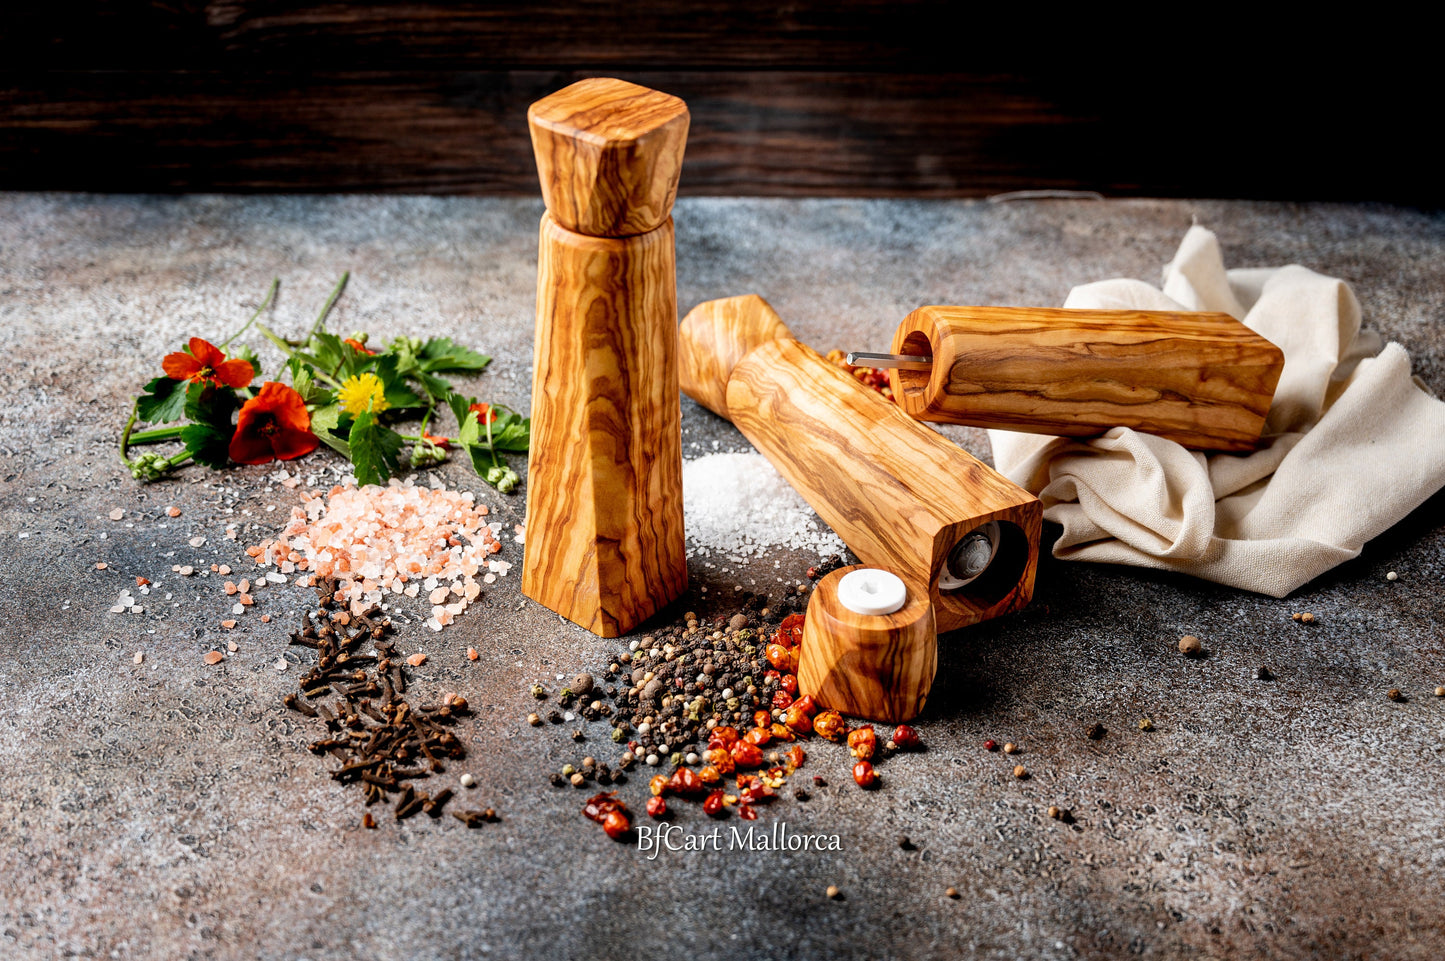 Customizable olive wood pepper mill for peppers or salt, Exclusive and own pepper shaker design